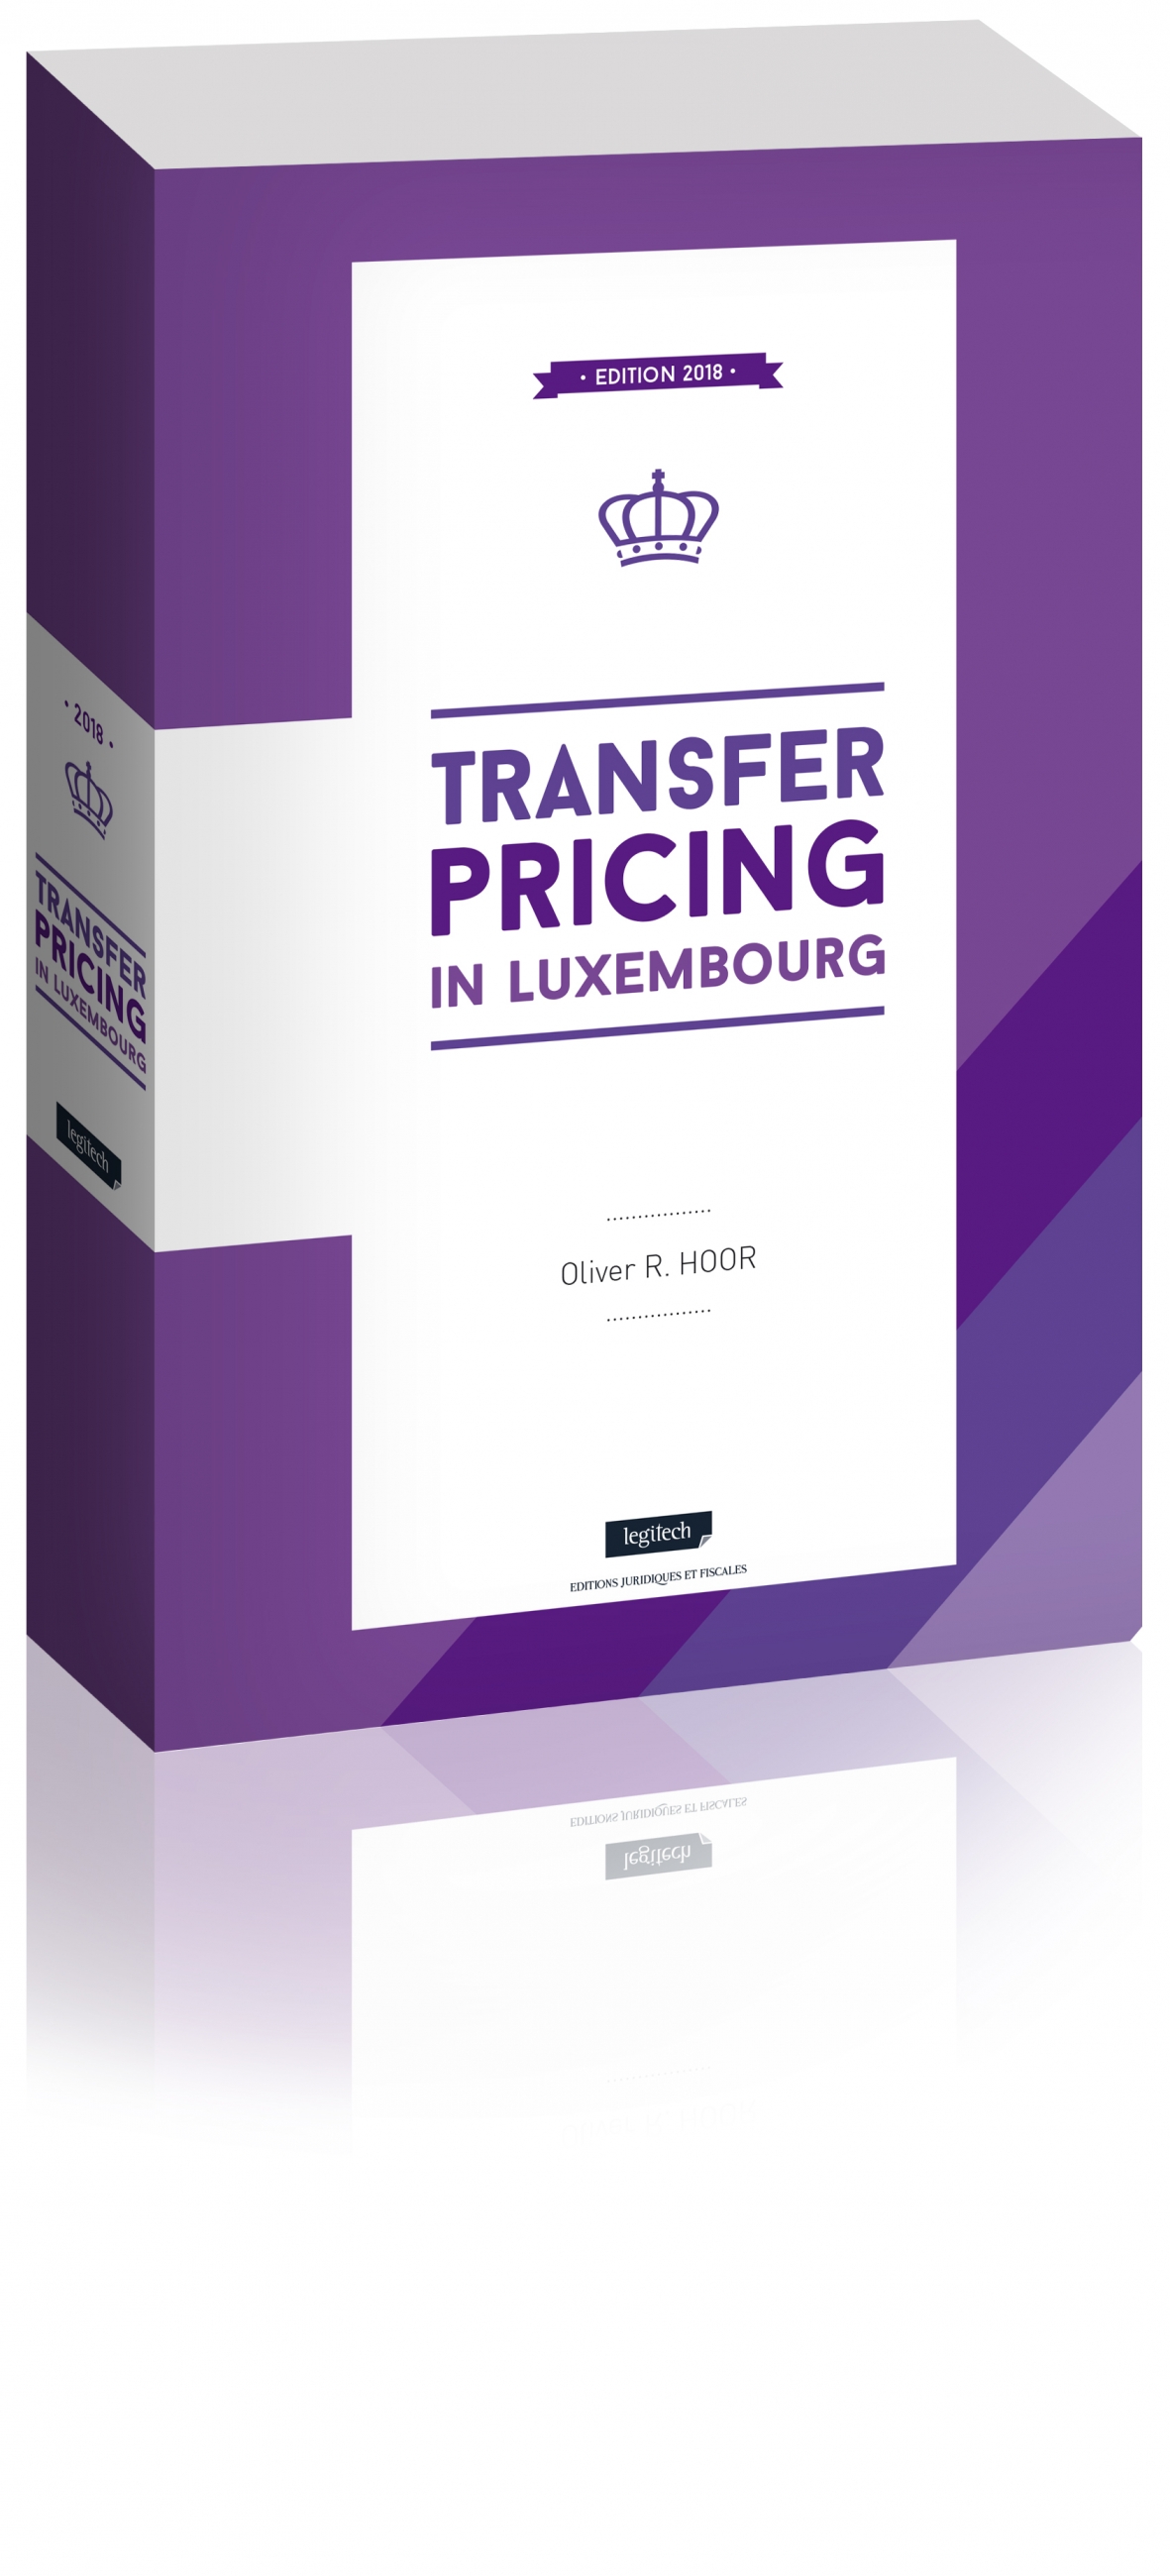 Transfer Pricing in Luxembourg 2018